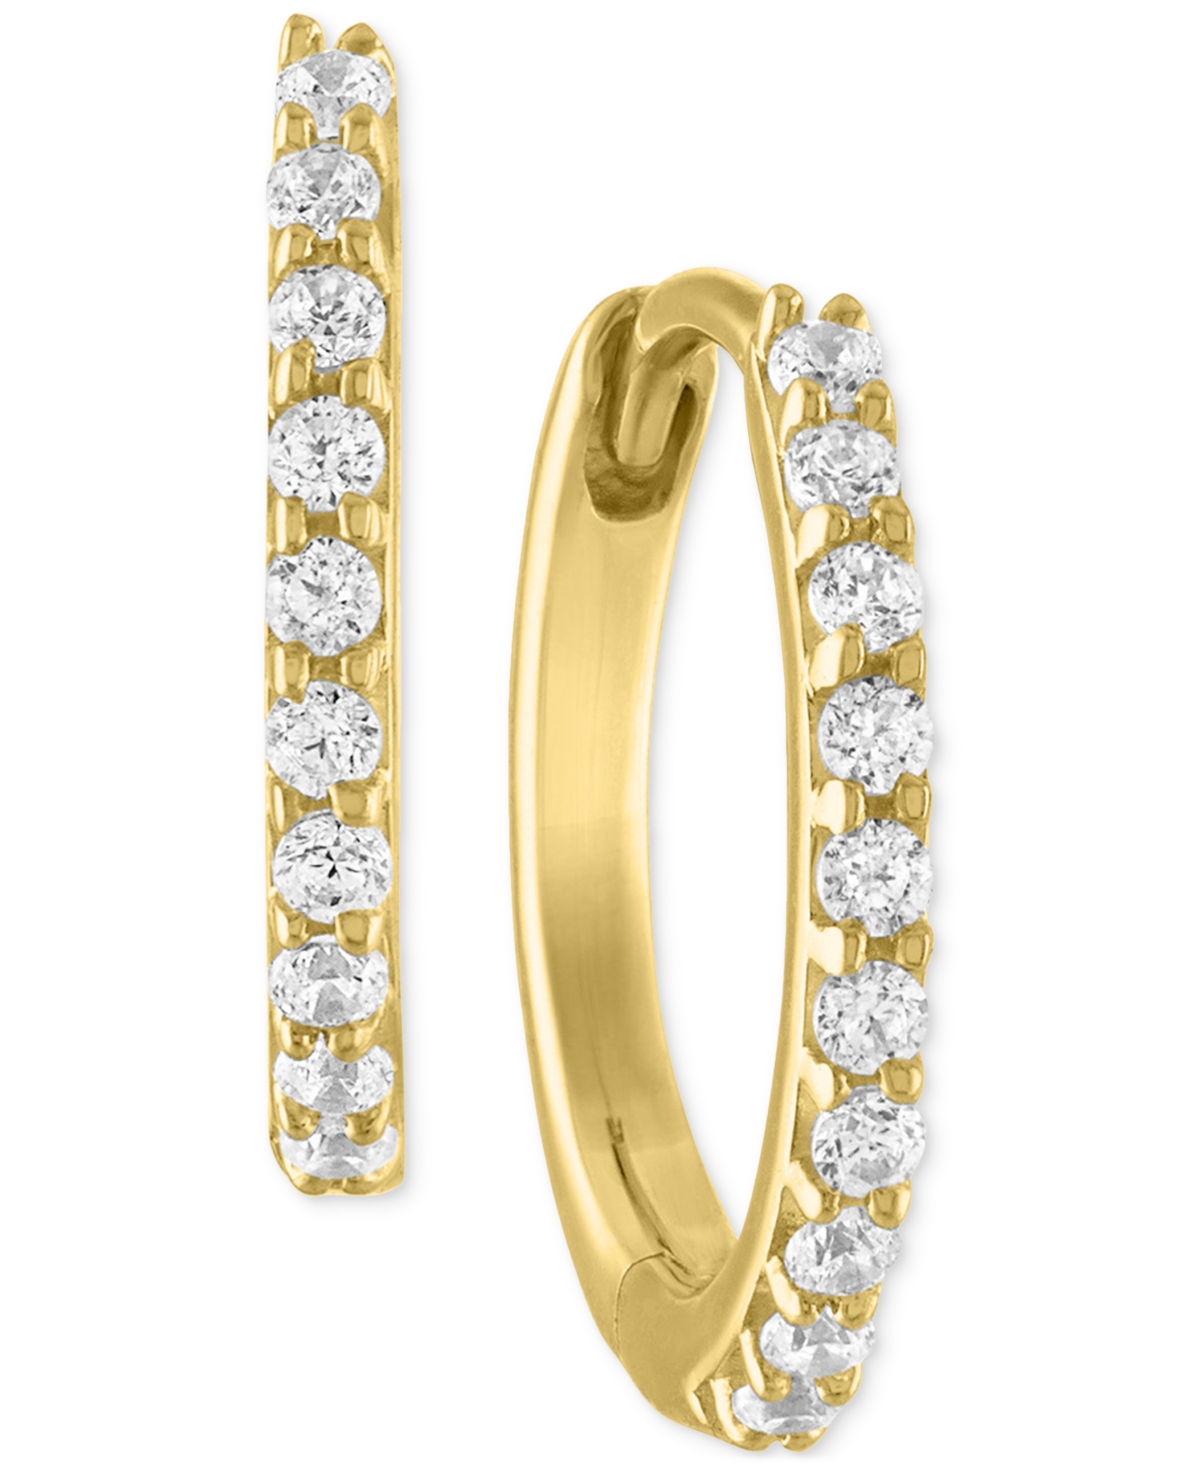 Forever Grown Diamonds Lab-Created Diamond Extra Small Hoop Earrings (1/10 ct. t.w.) in 10k White or Yellow Gold